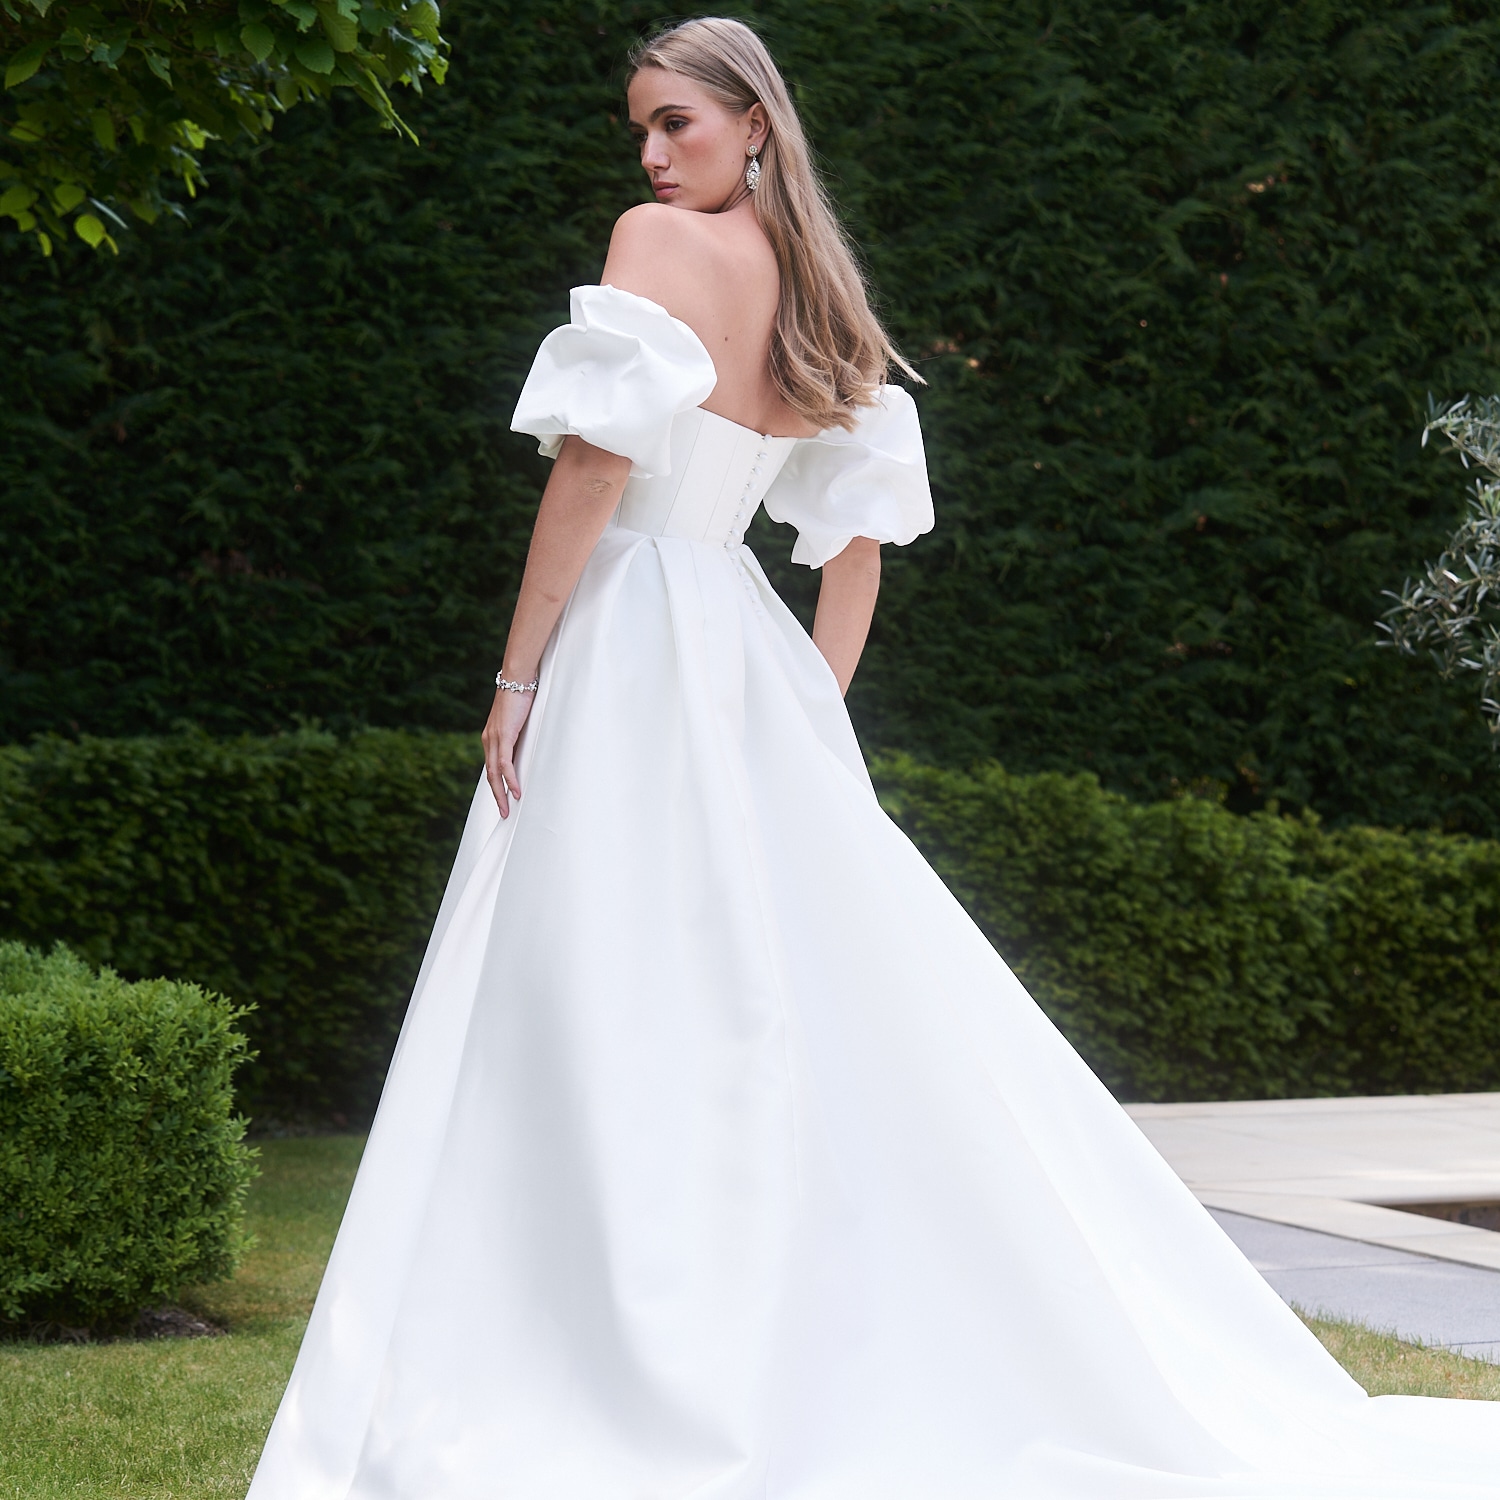 The Caroline Castigliano Tribute wedding gown is a breathtaking embodiment of modern bridal elegance. Handcrafted from luminous lightweight Italian Mikado silk, this masterpiece exudes an air of timeless sophistication. Find your dream wedding dress at Your Dream Bridal near Boston.